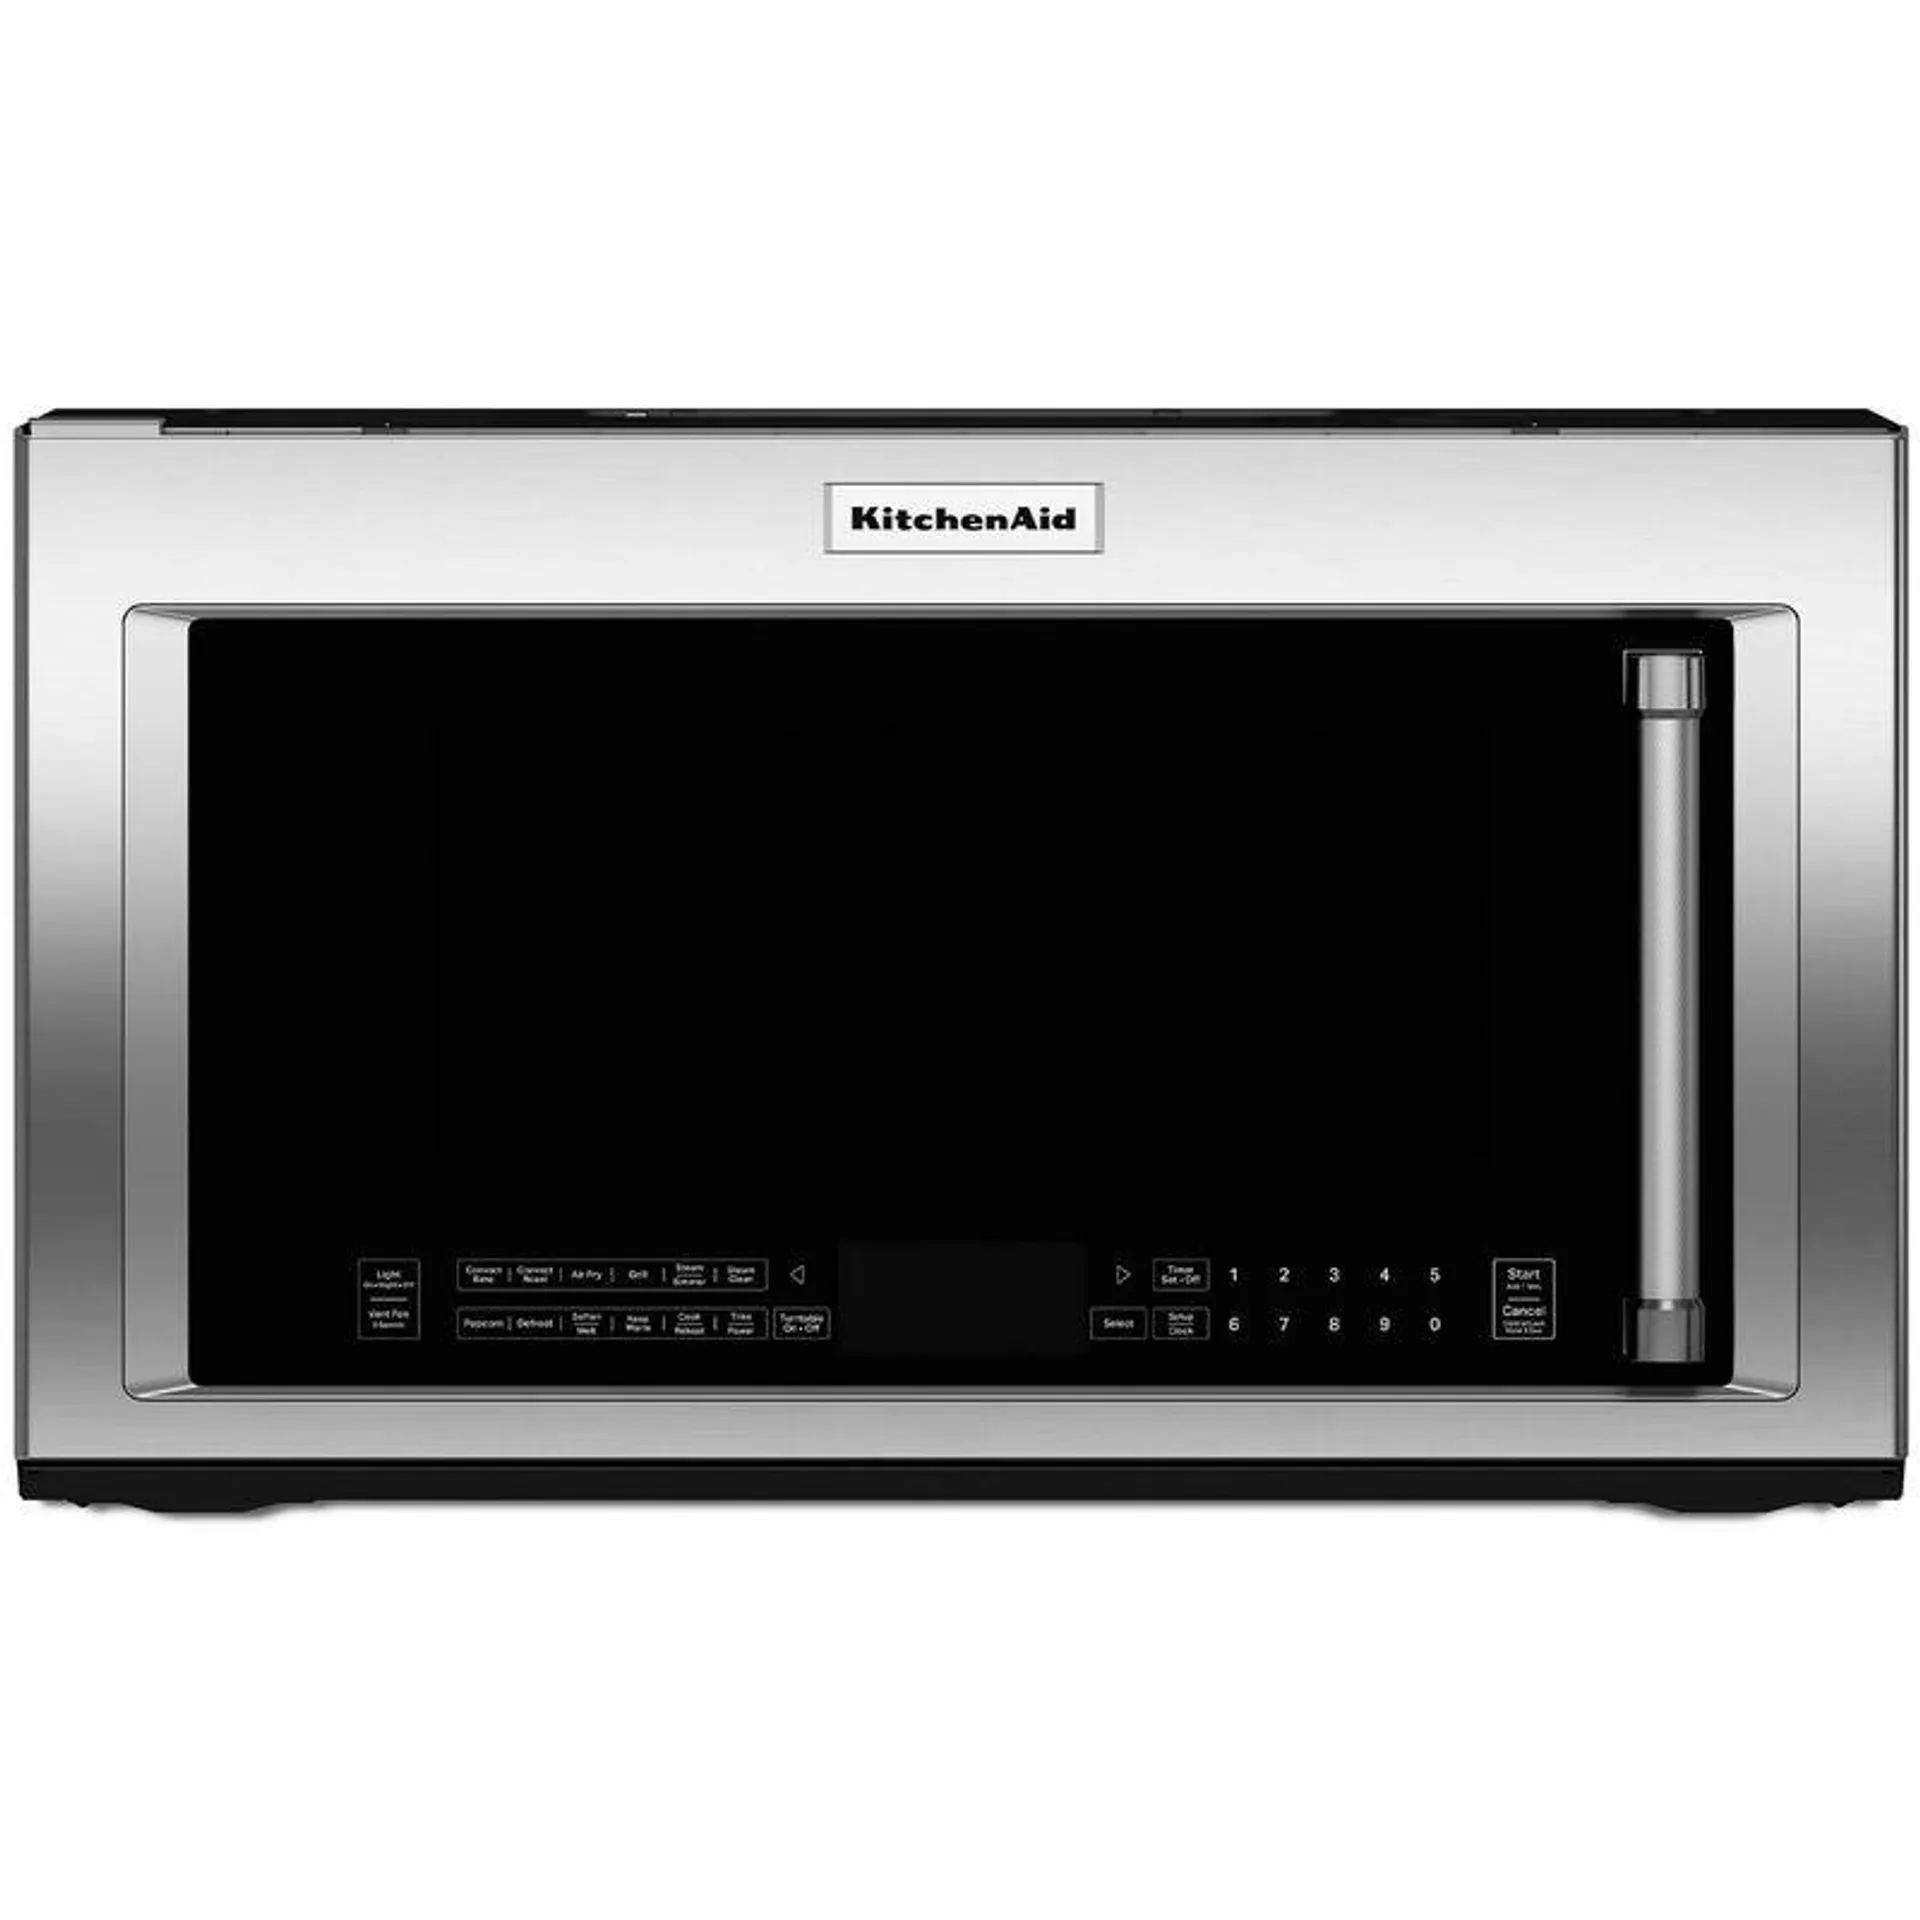 KitchenAid 30 in. 1.9 cu. ft. Over-the-Range Microwave with 10 Power Levels, 400 CFM & Sensor Cooking Controls - Stainless Steel with PrintShield Finish